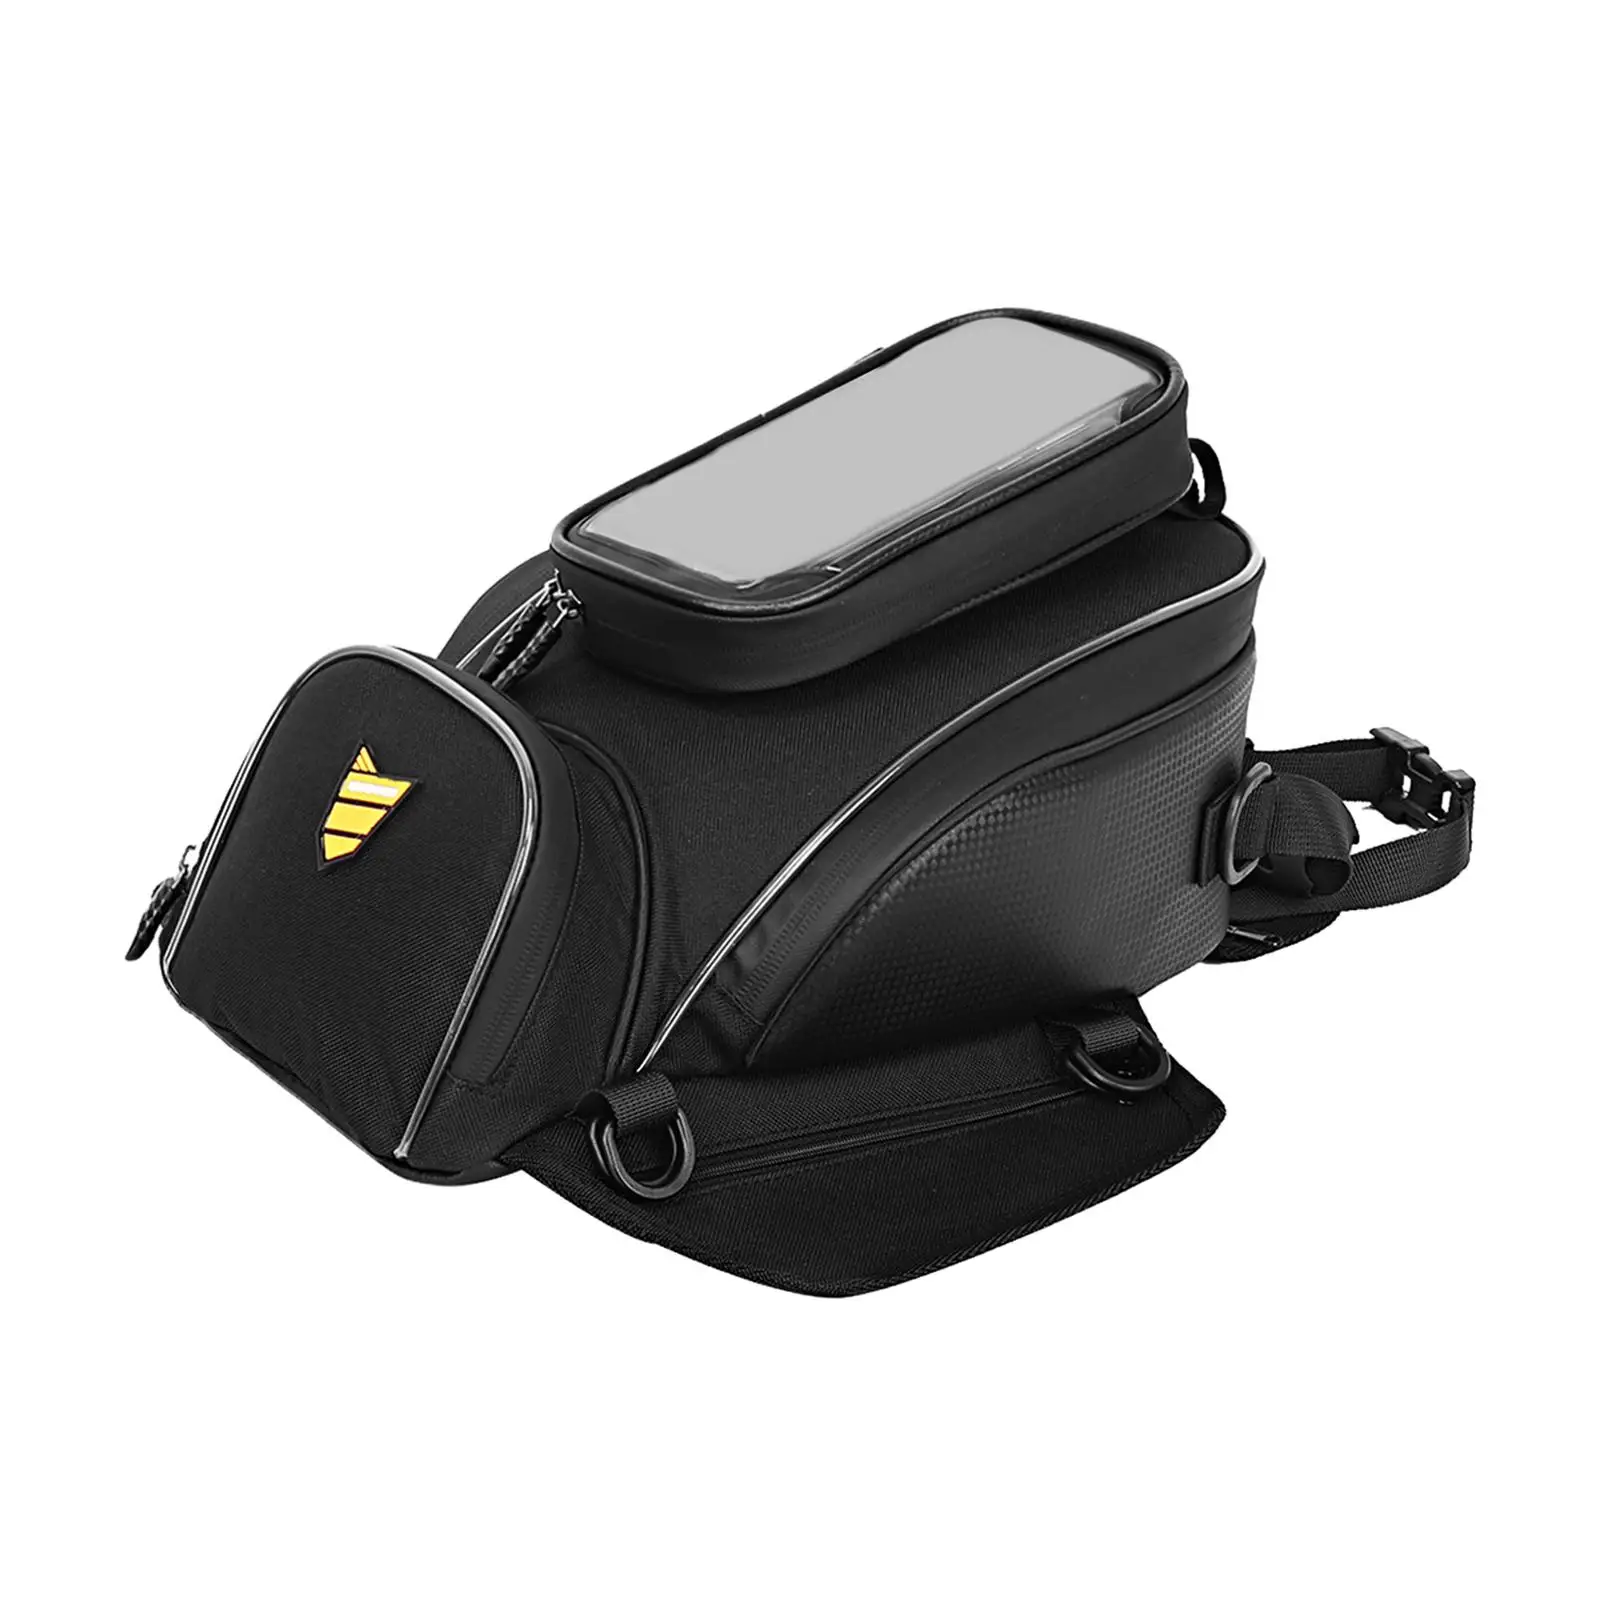 Motorcycle Fuel Tank Bag Water Resistant Accessory for Outdoor Sports Riding